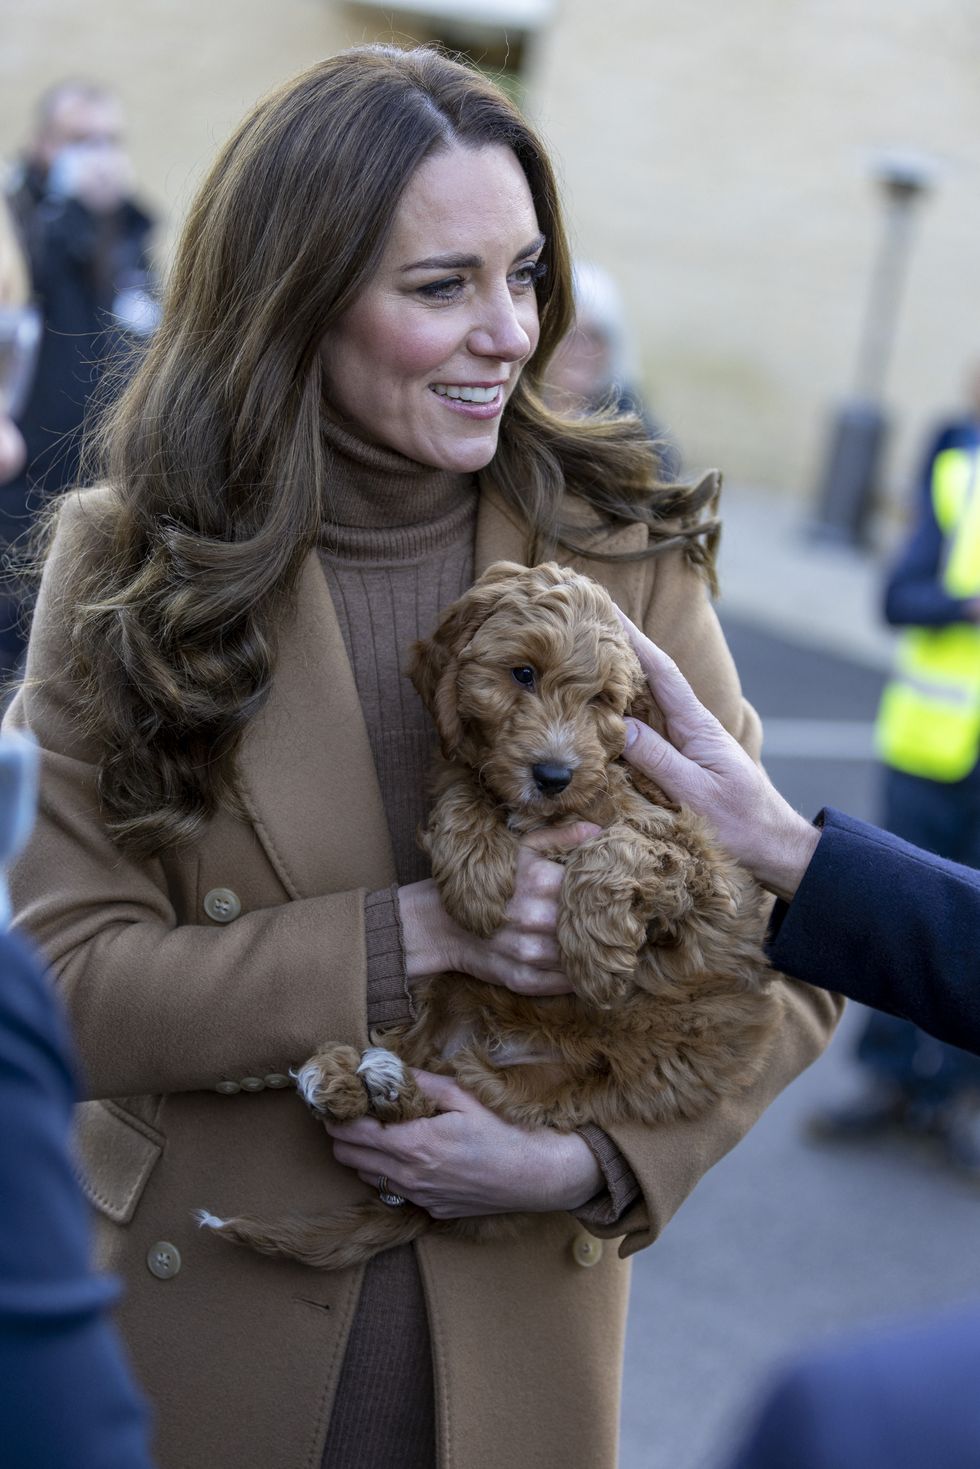 britains catherine, duchess of cambridge, holds a therapy puppy, before unveiling its name, alfie, to members of staff during her visit to clitheroe community hospital in north east england on january 20, 2022, to hear about their experiences during the covid 19 pandemic   the puppy, funded through the hospital charity elhtme using a grant from nhs charities together, will be used to support the wellbeing of staff and patients at the hospital photo by james glossop  pool  afp photo by james glossoppoolafp via getty images